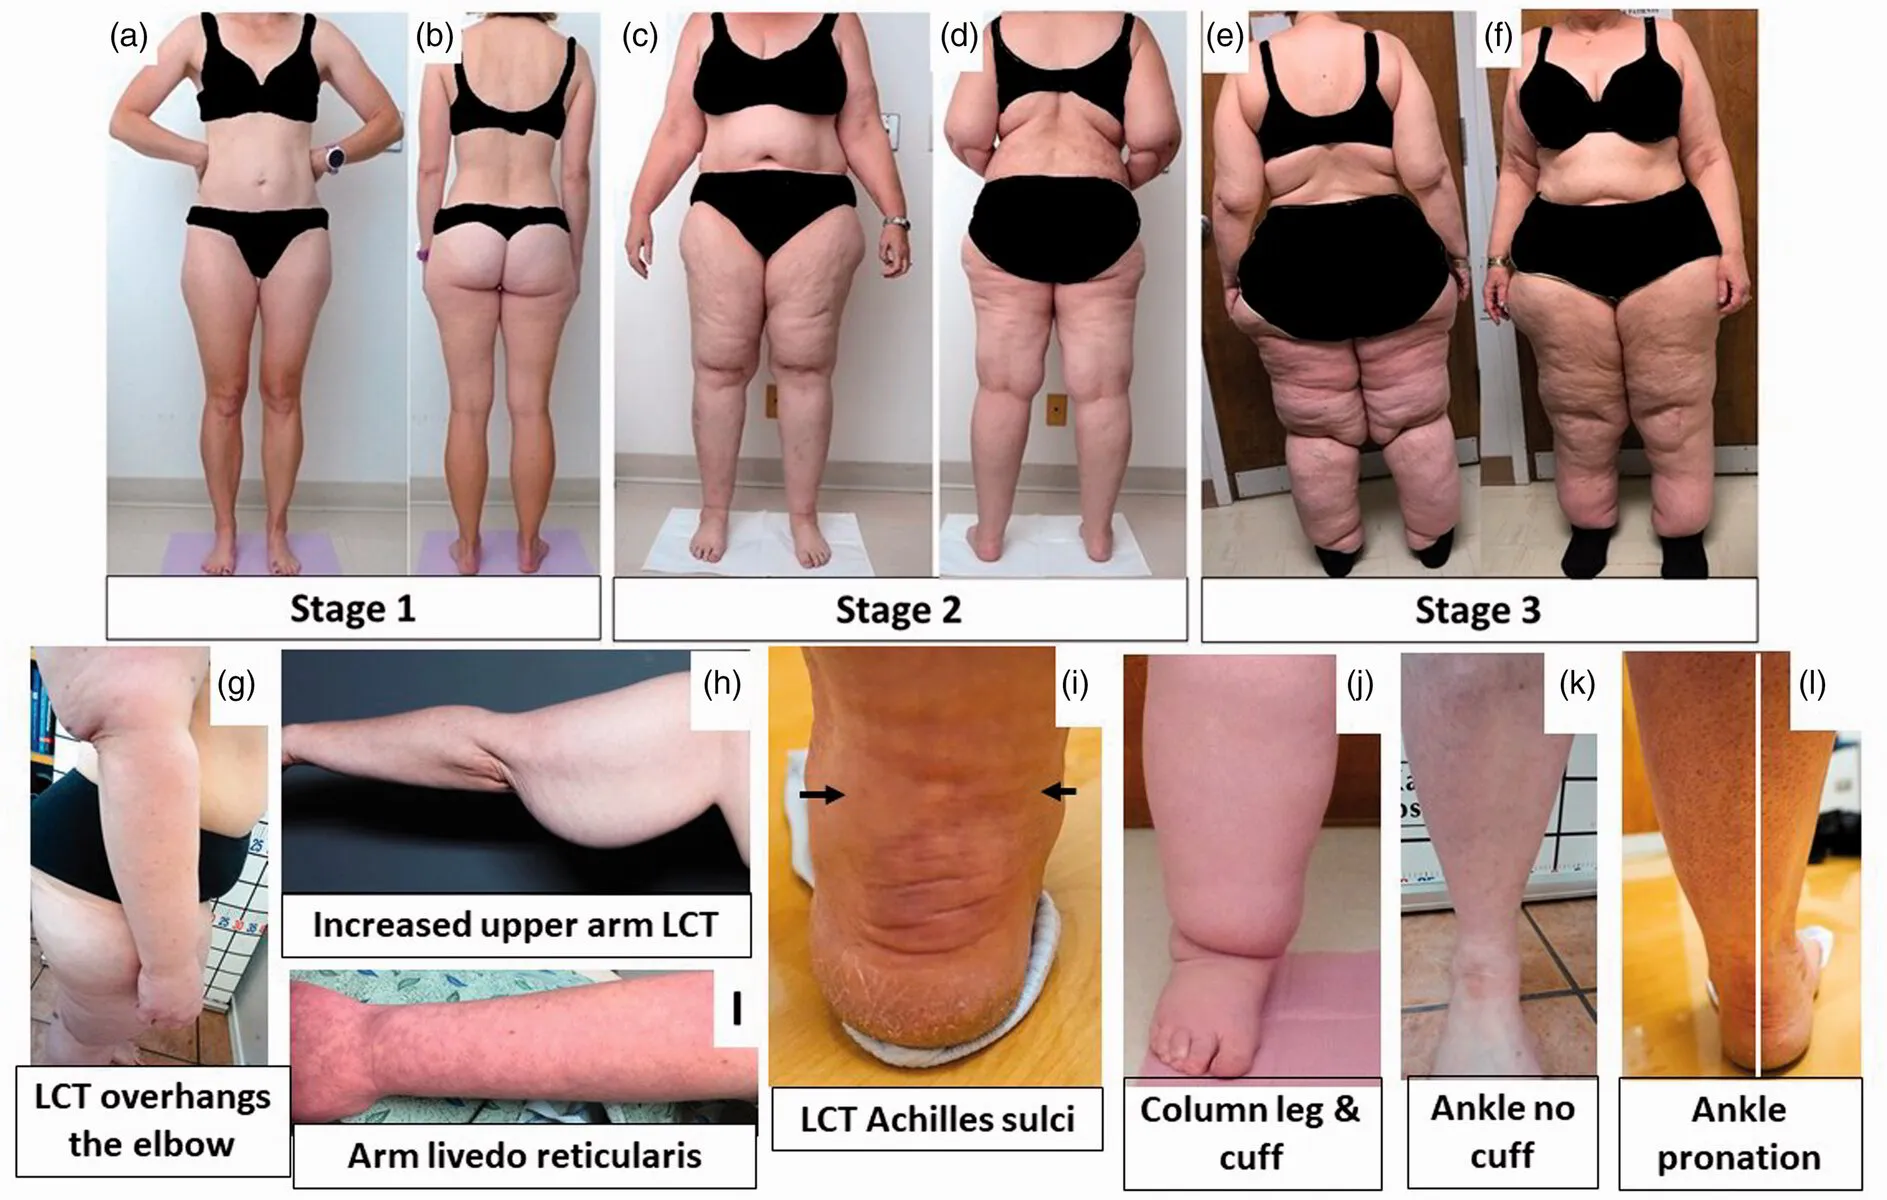 Different stages, signs and symptoms of lipoedema and secondary lymphoedema